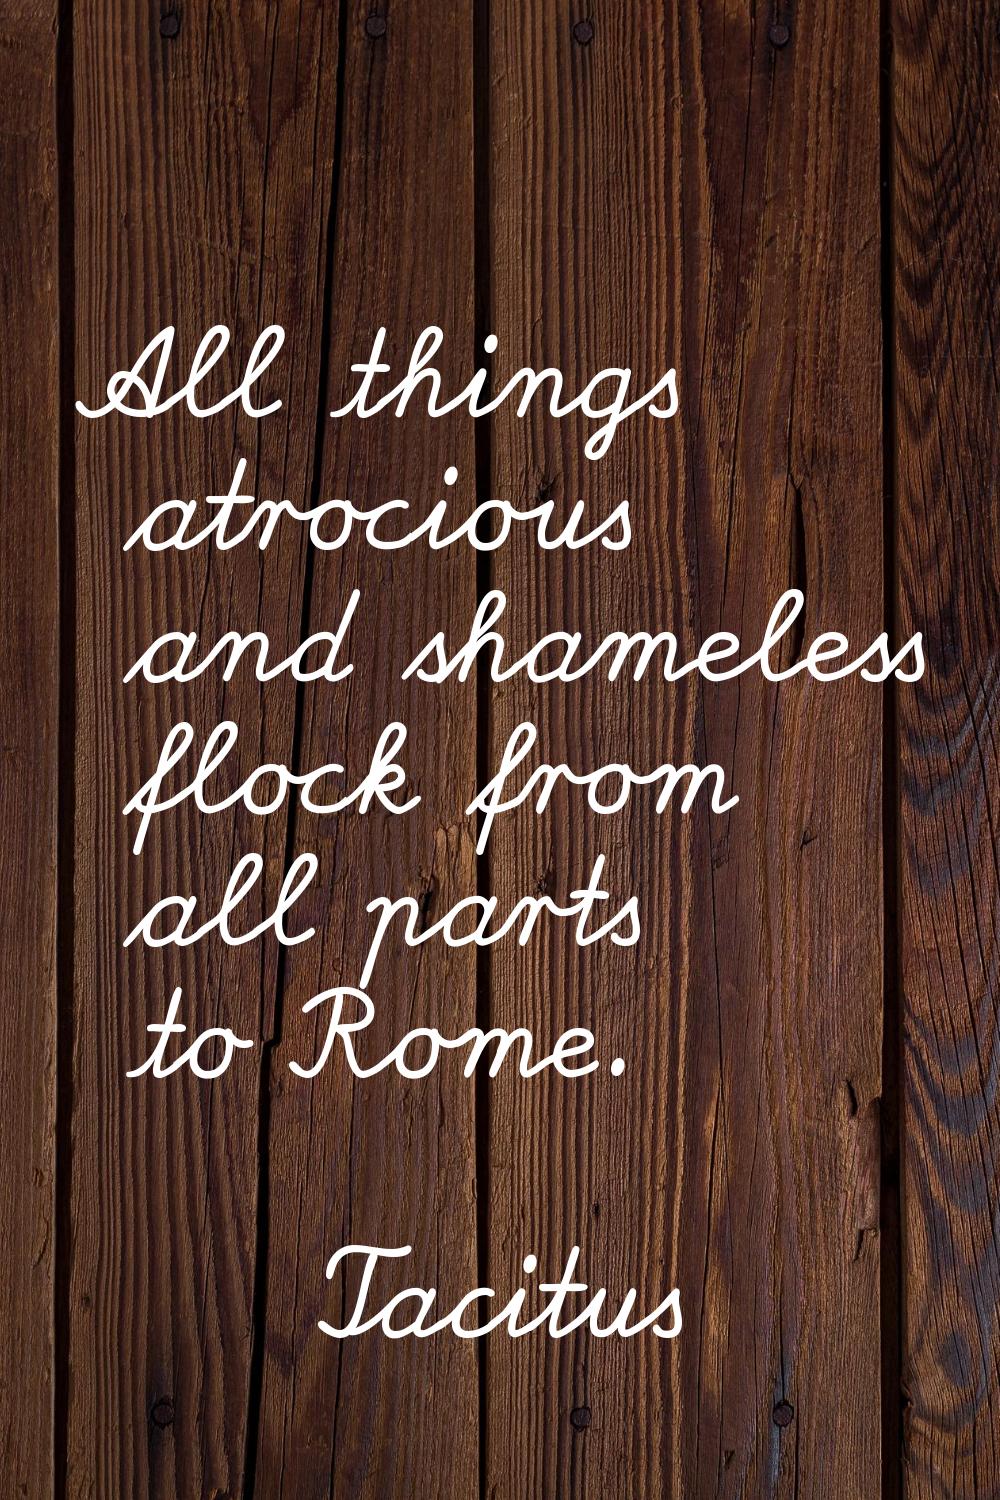 All things atrocious and shameless flock from all parts to Rome.